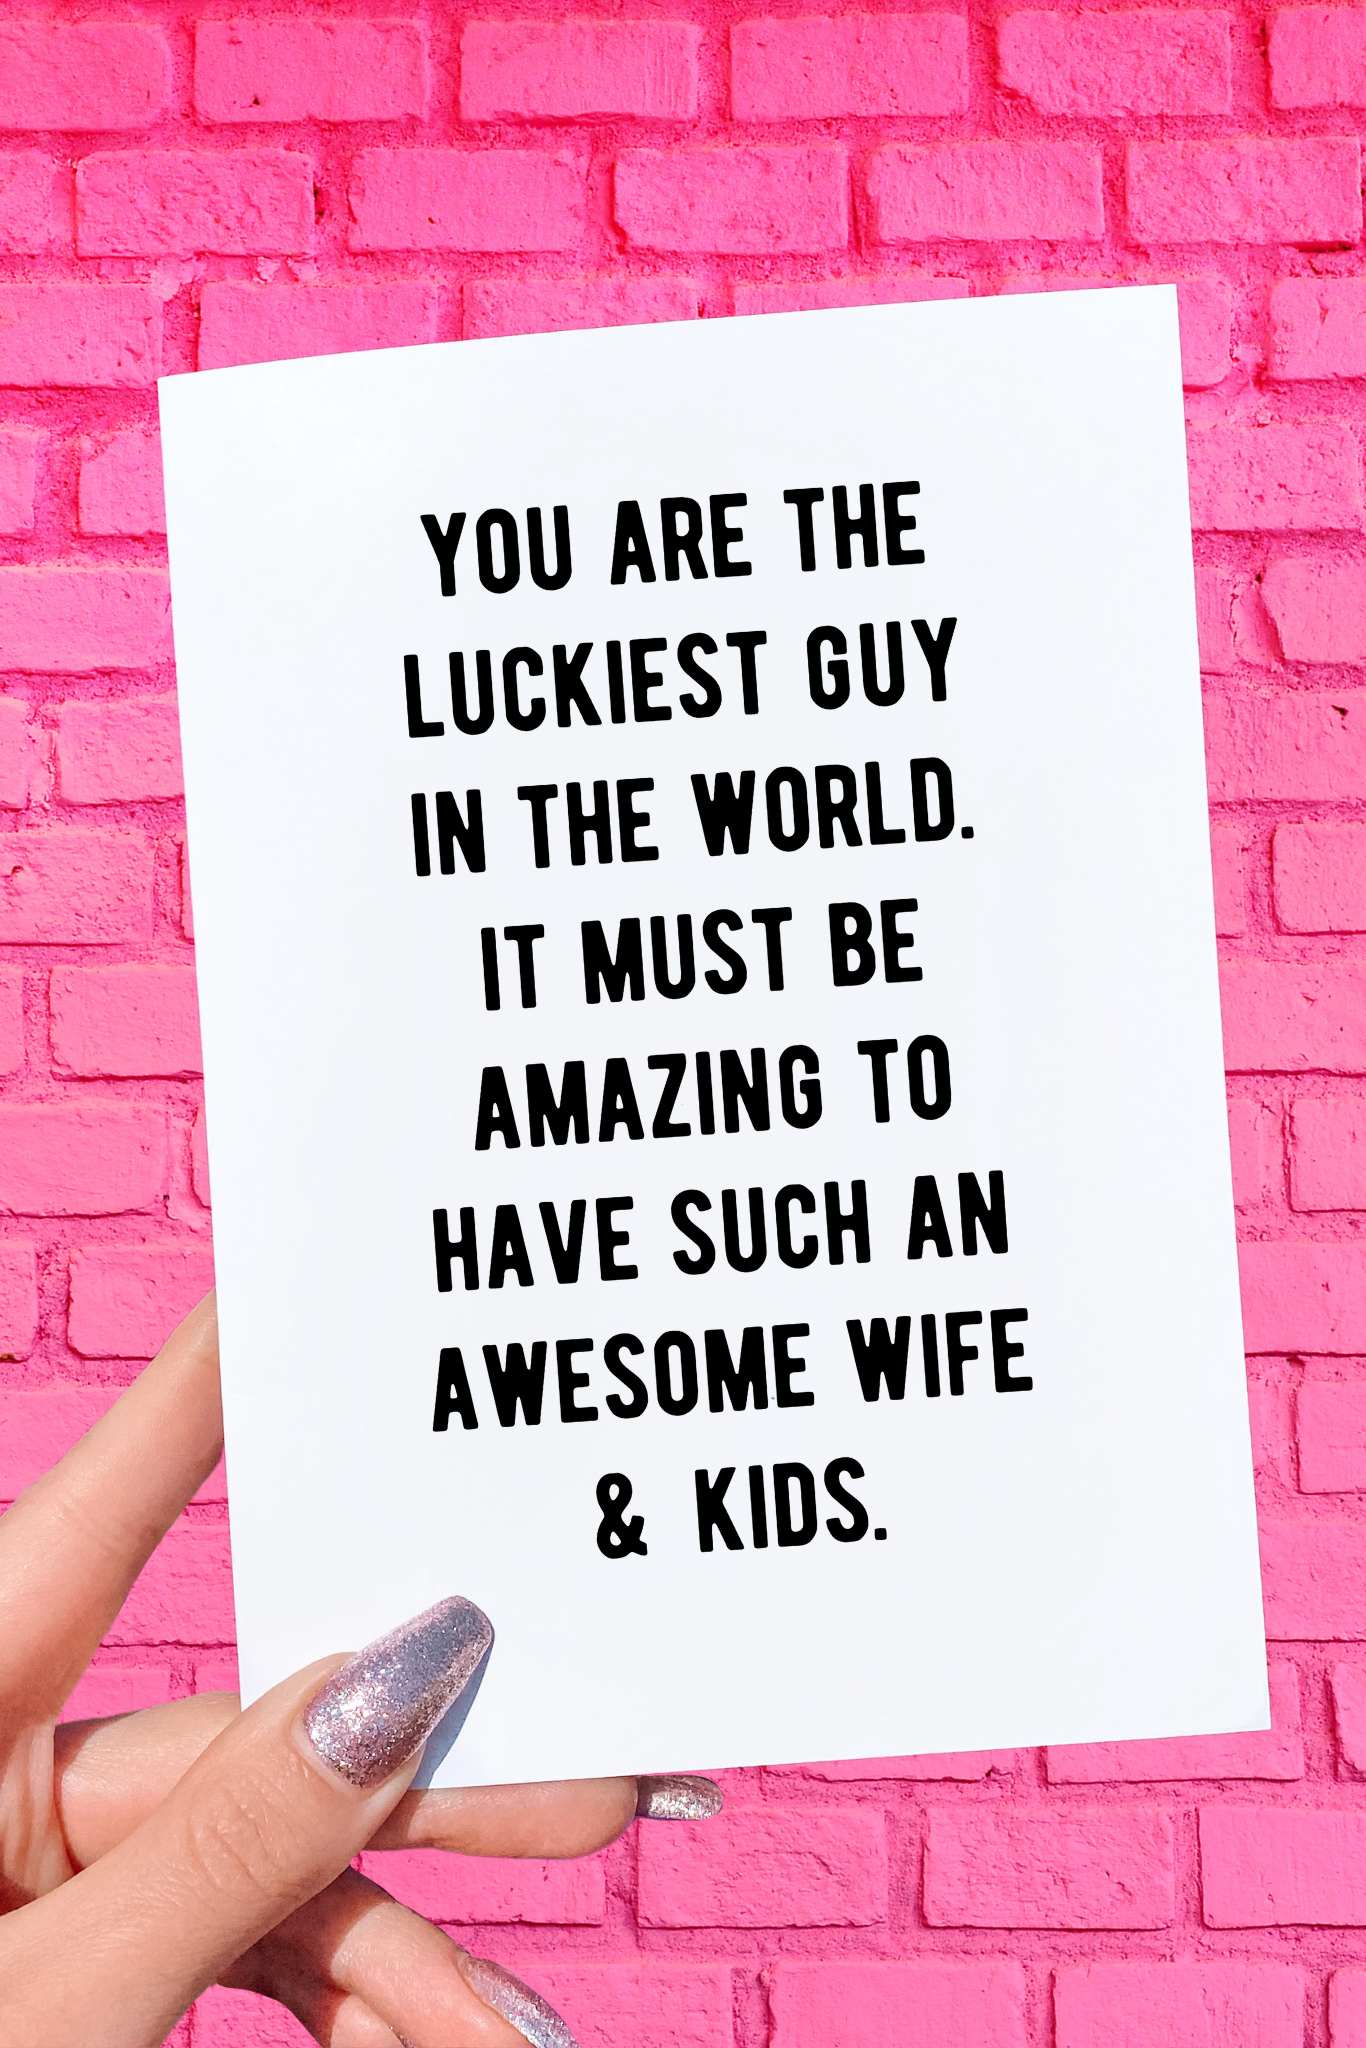 You Are The Luckiest Guy In The World Funny Father's Day Cardc - UntamedEgo LLC.